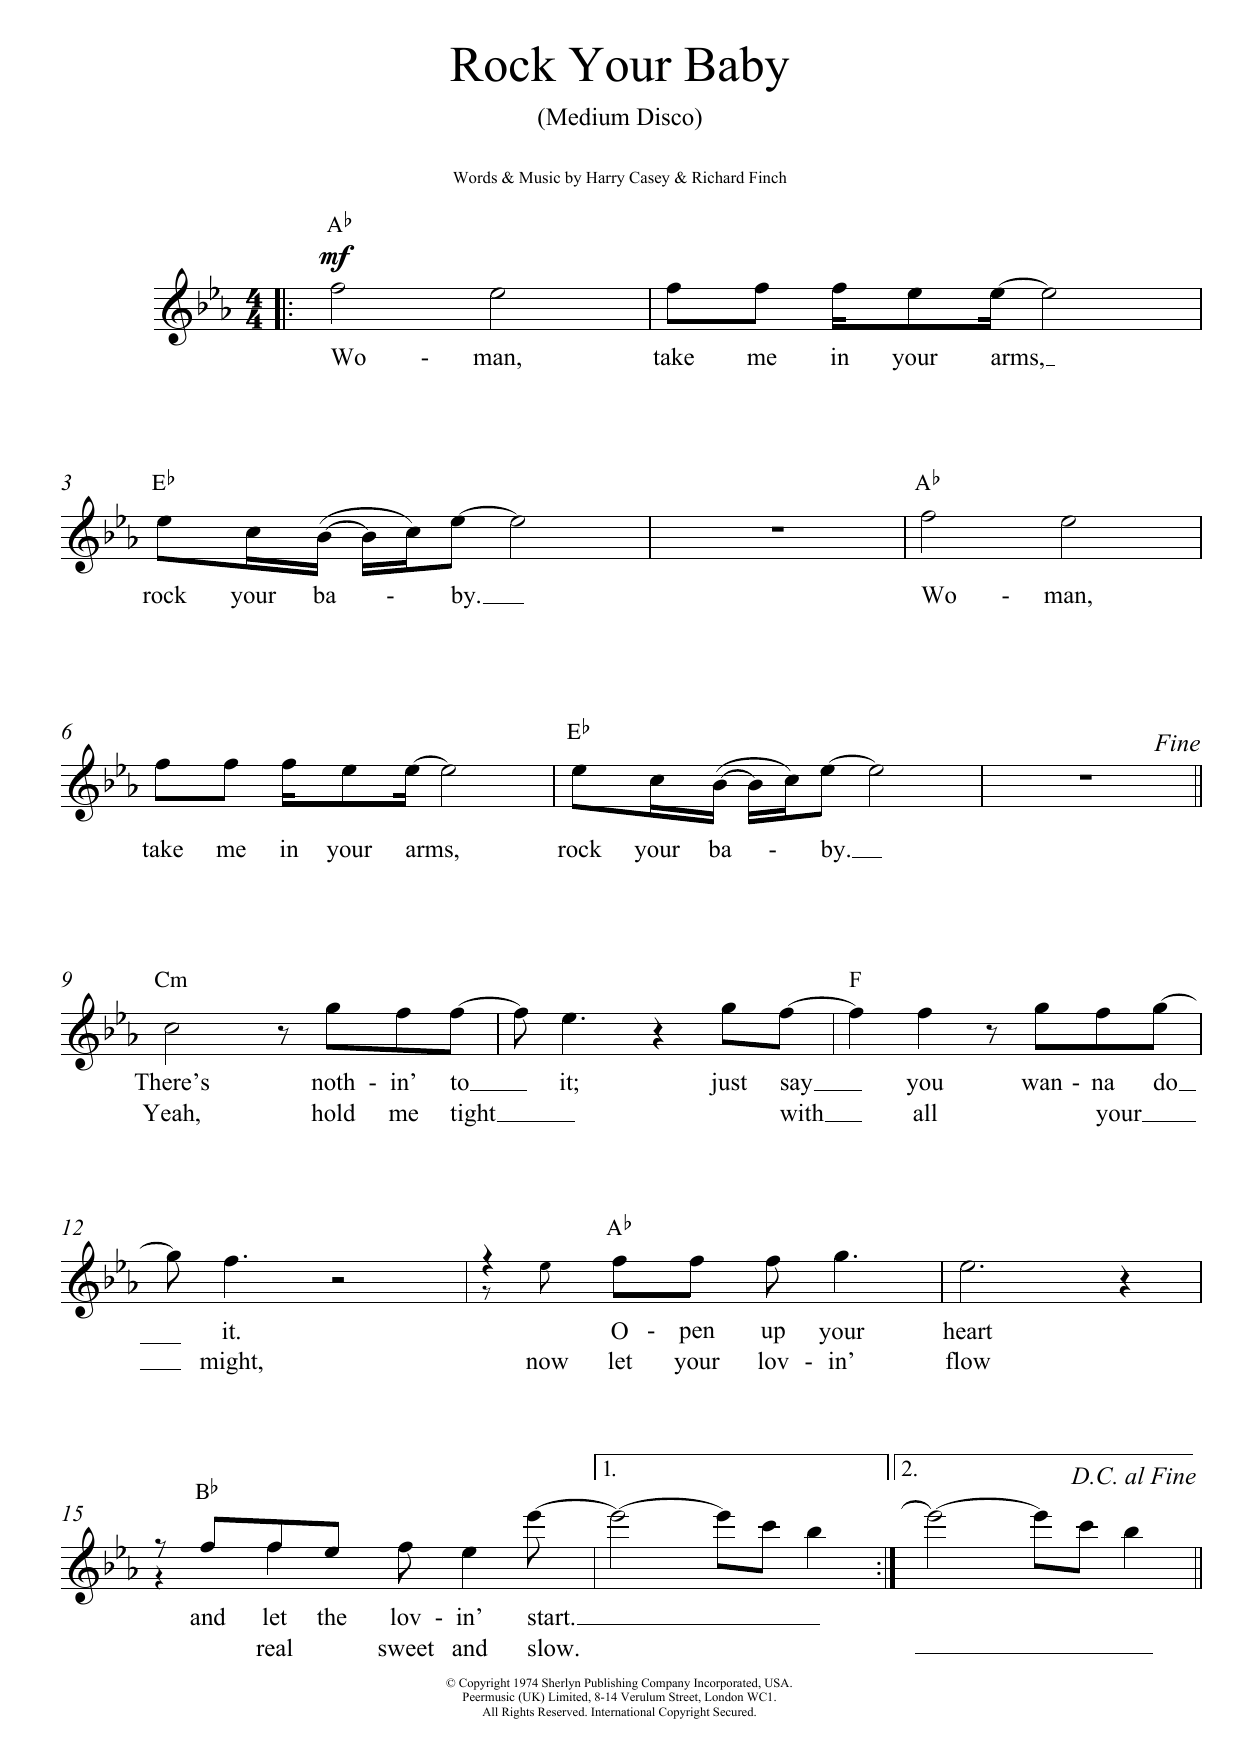 Harry Casey And Richard Finch Rock Your Baby sheet music notes and chords. Download Printable PDF.